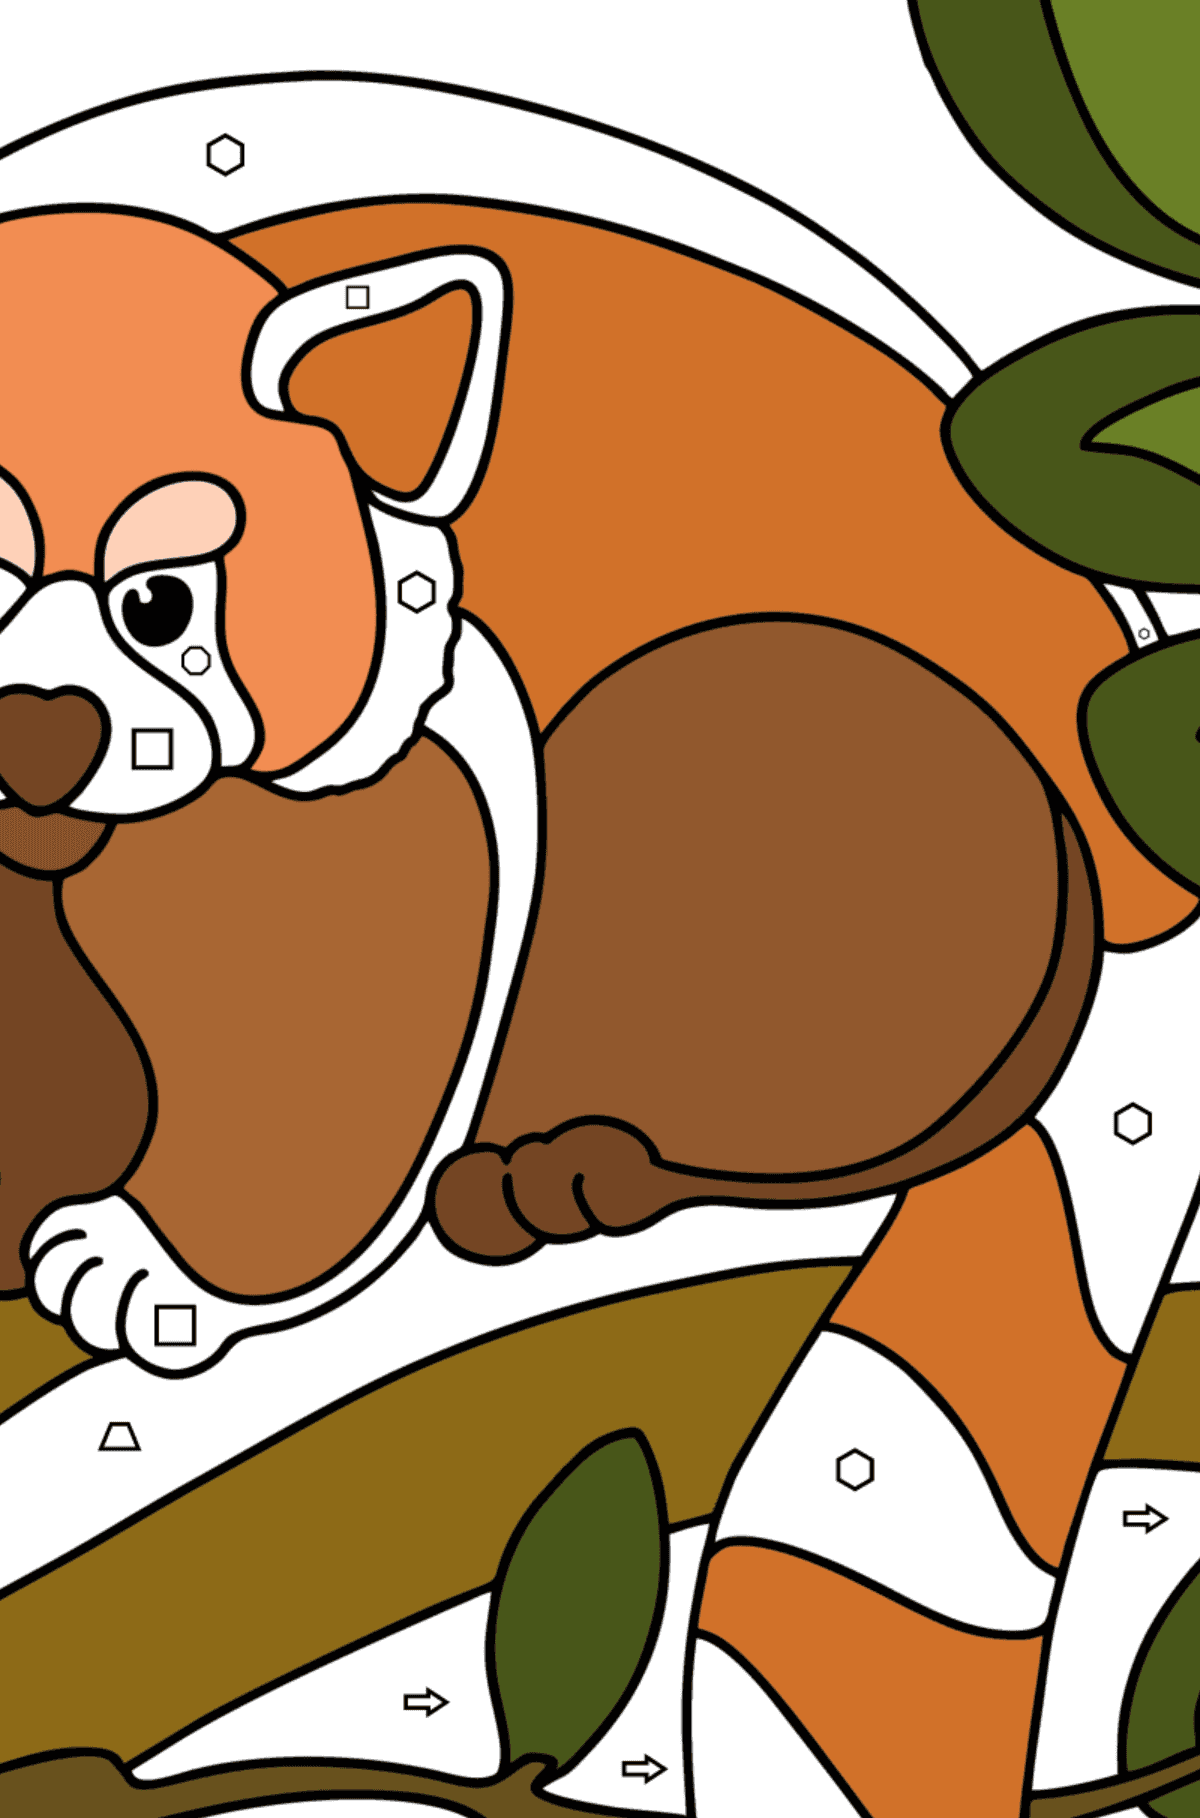 Red panda coloring page - Coloring by Geometric Shapes for Kids